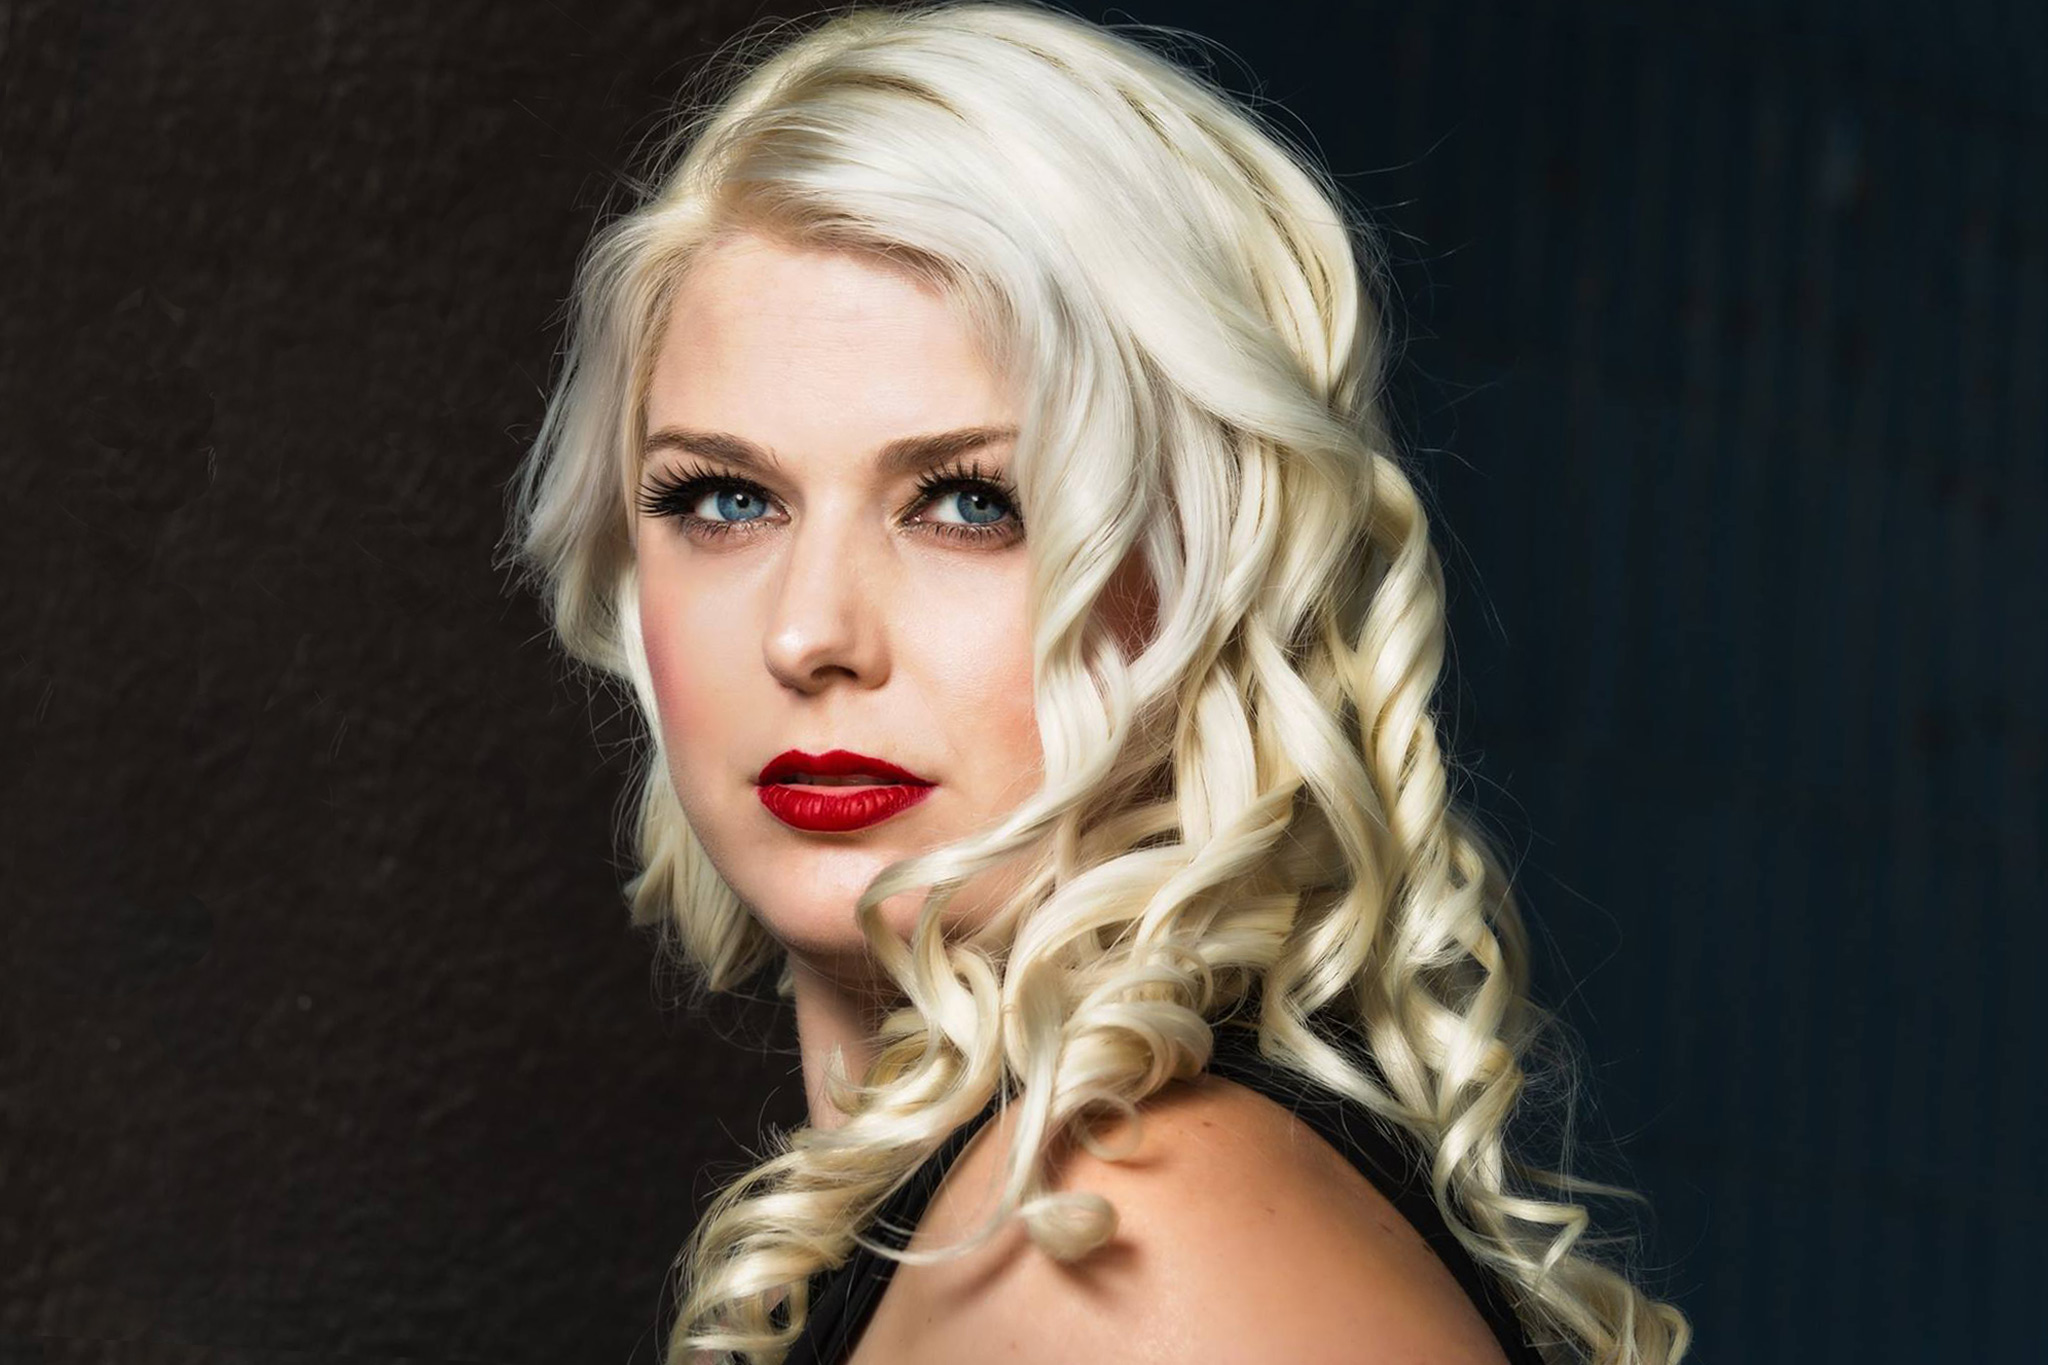 Platinum Blonde Hair Color: 10 Stunning Shades to Try - wide 7